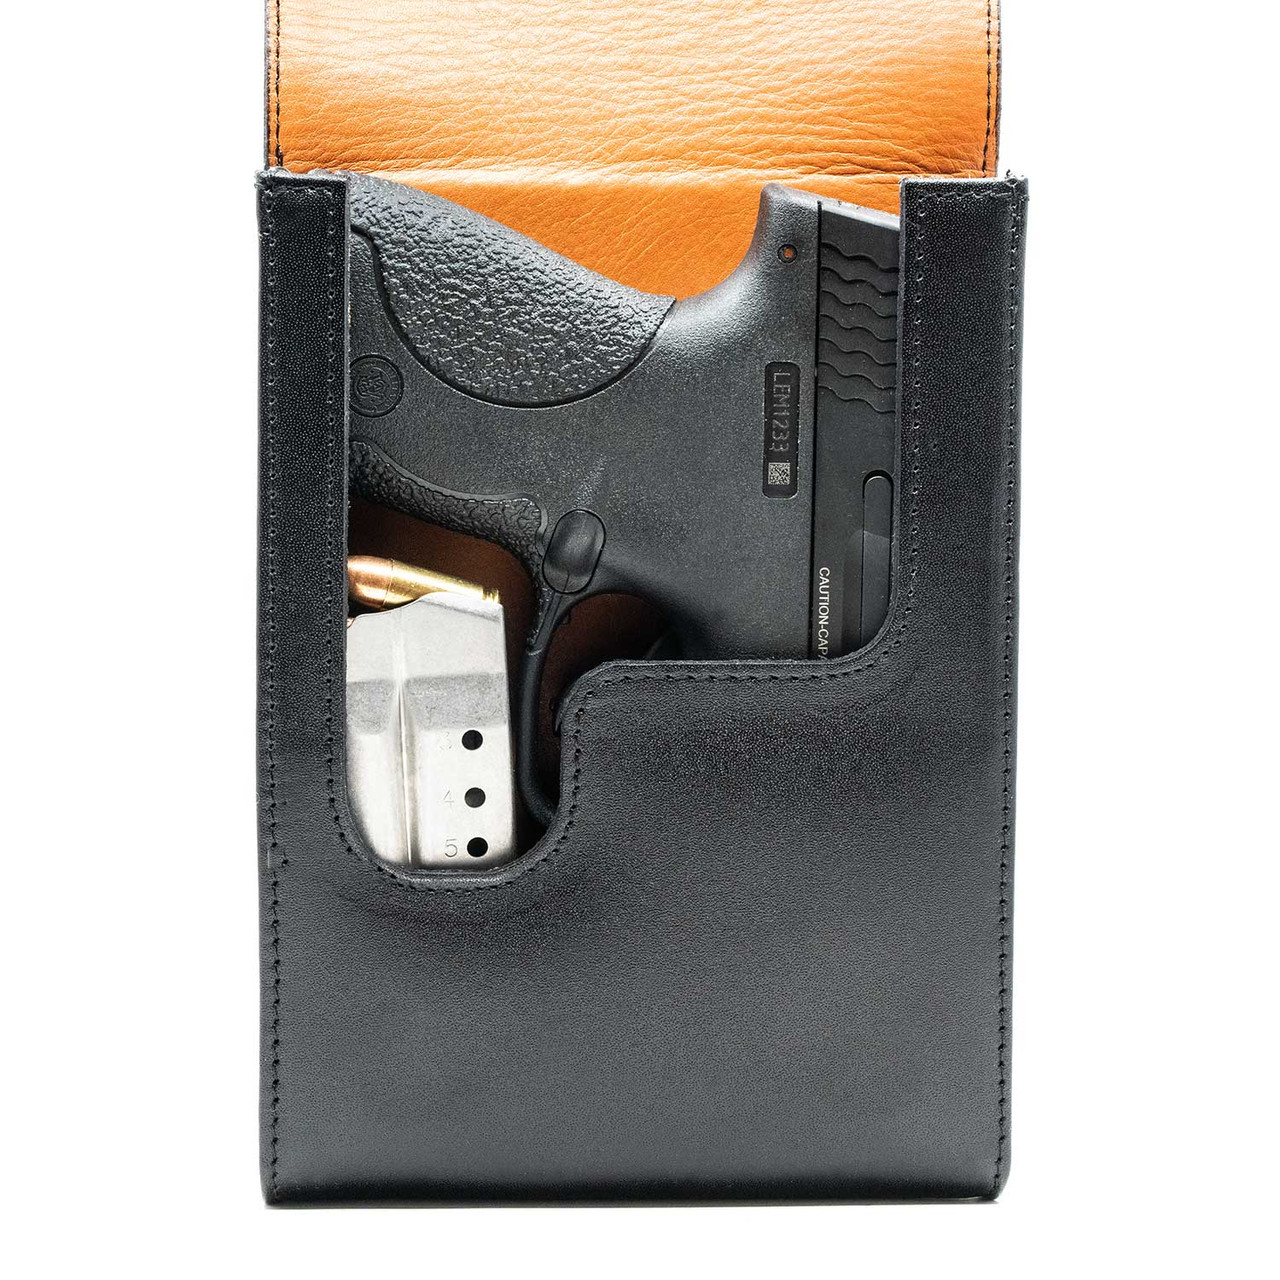 The Smith & Wesson CSX Xtra Mag Black Leather Holster